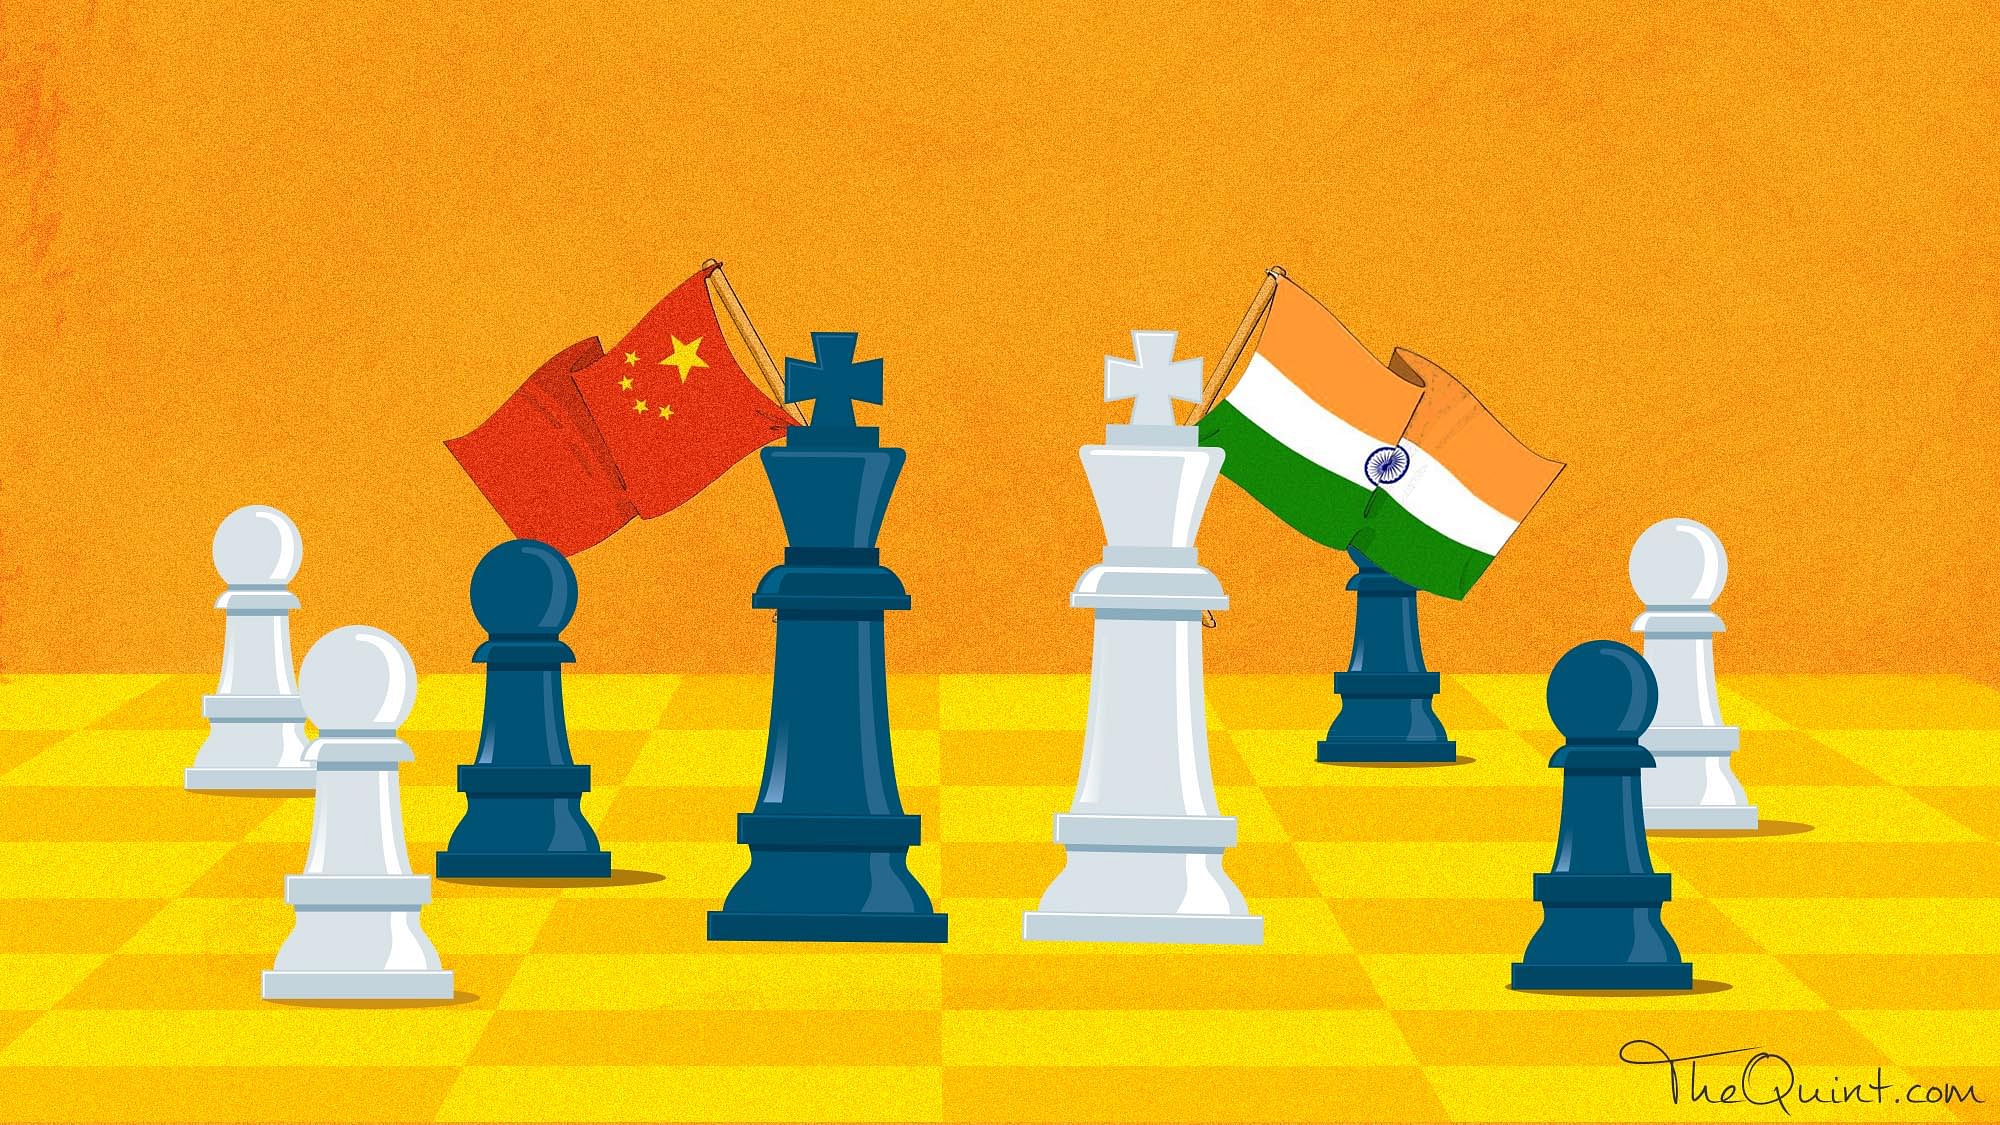 

War as an instrument of diplomacy is not an option either for India or China. 